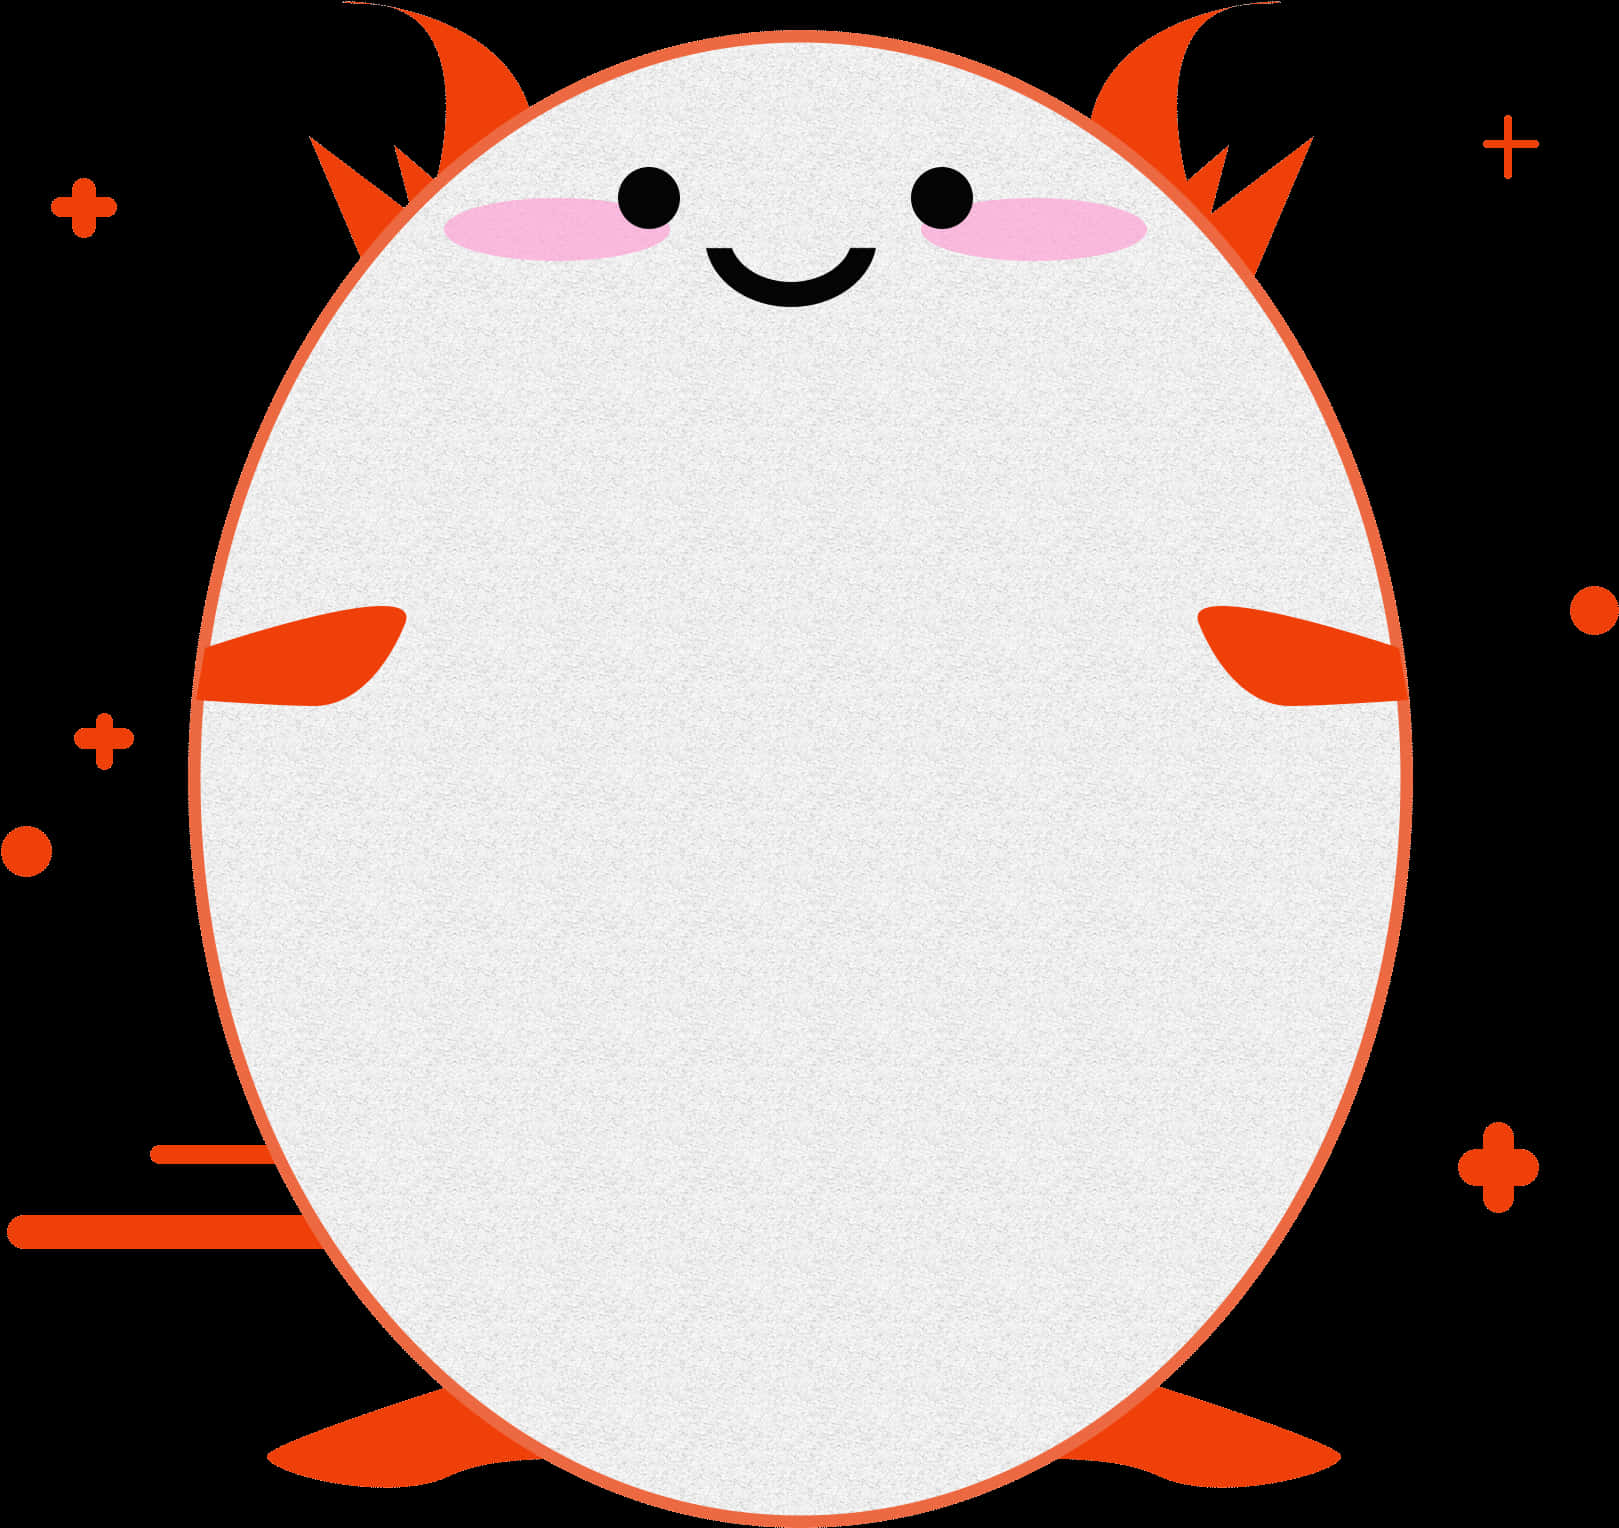 A Cartoon Of A White Egg With Orange Legs And A Smiling Face